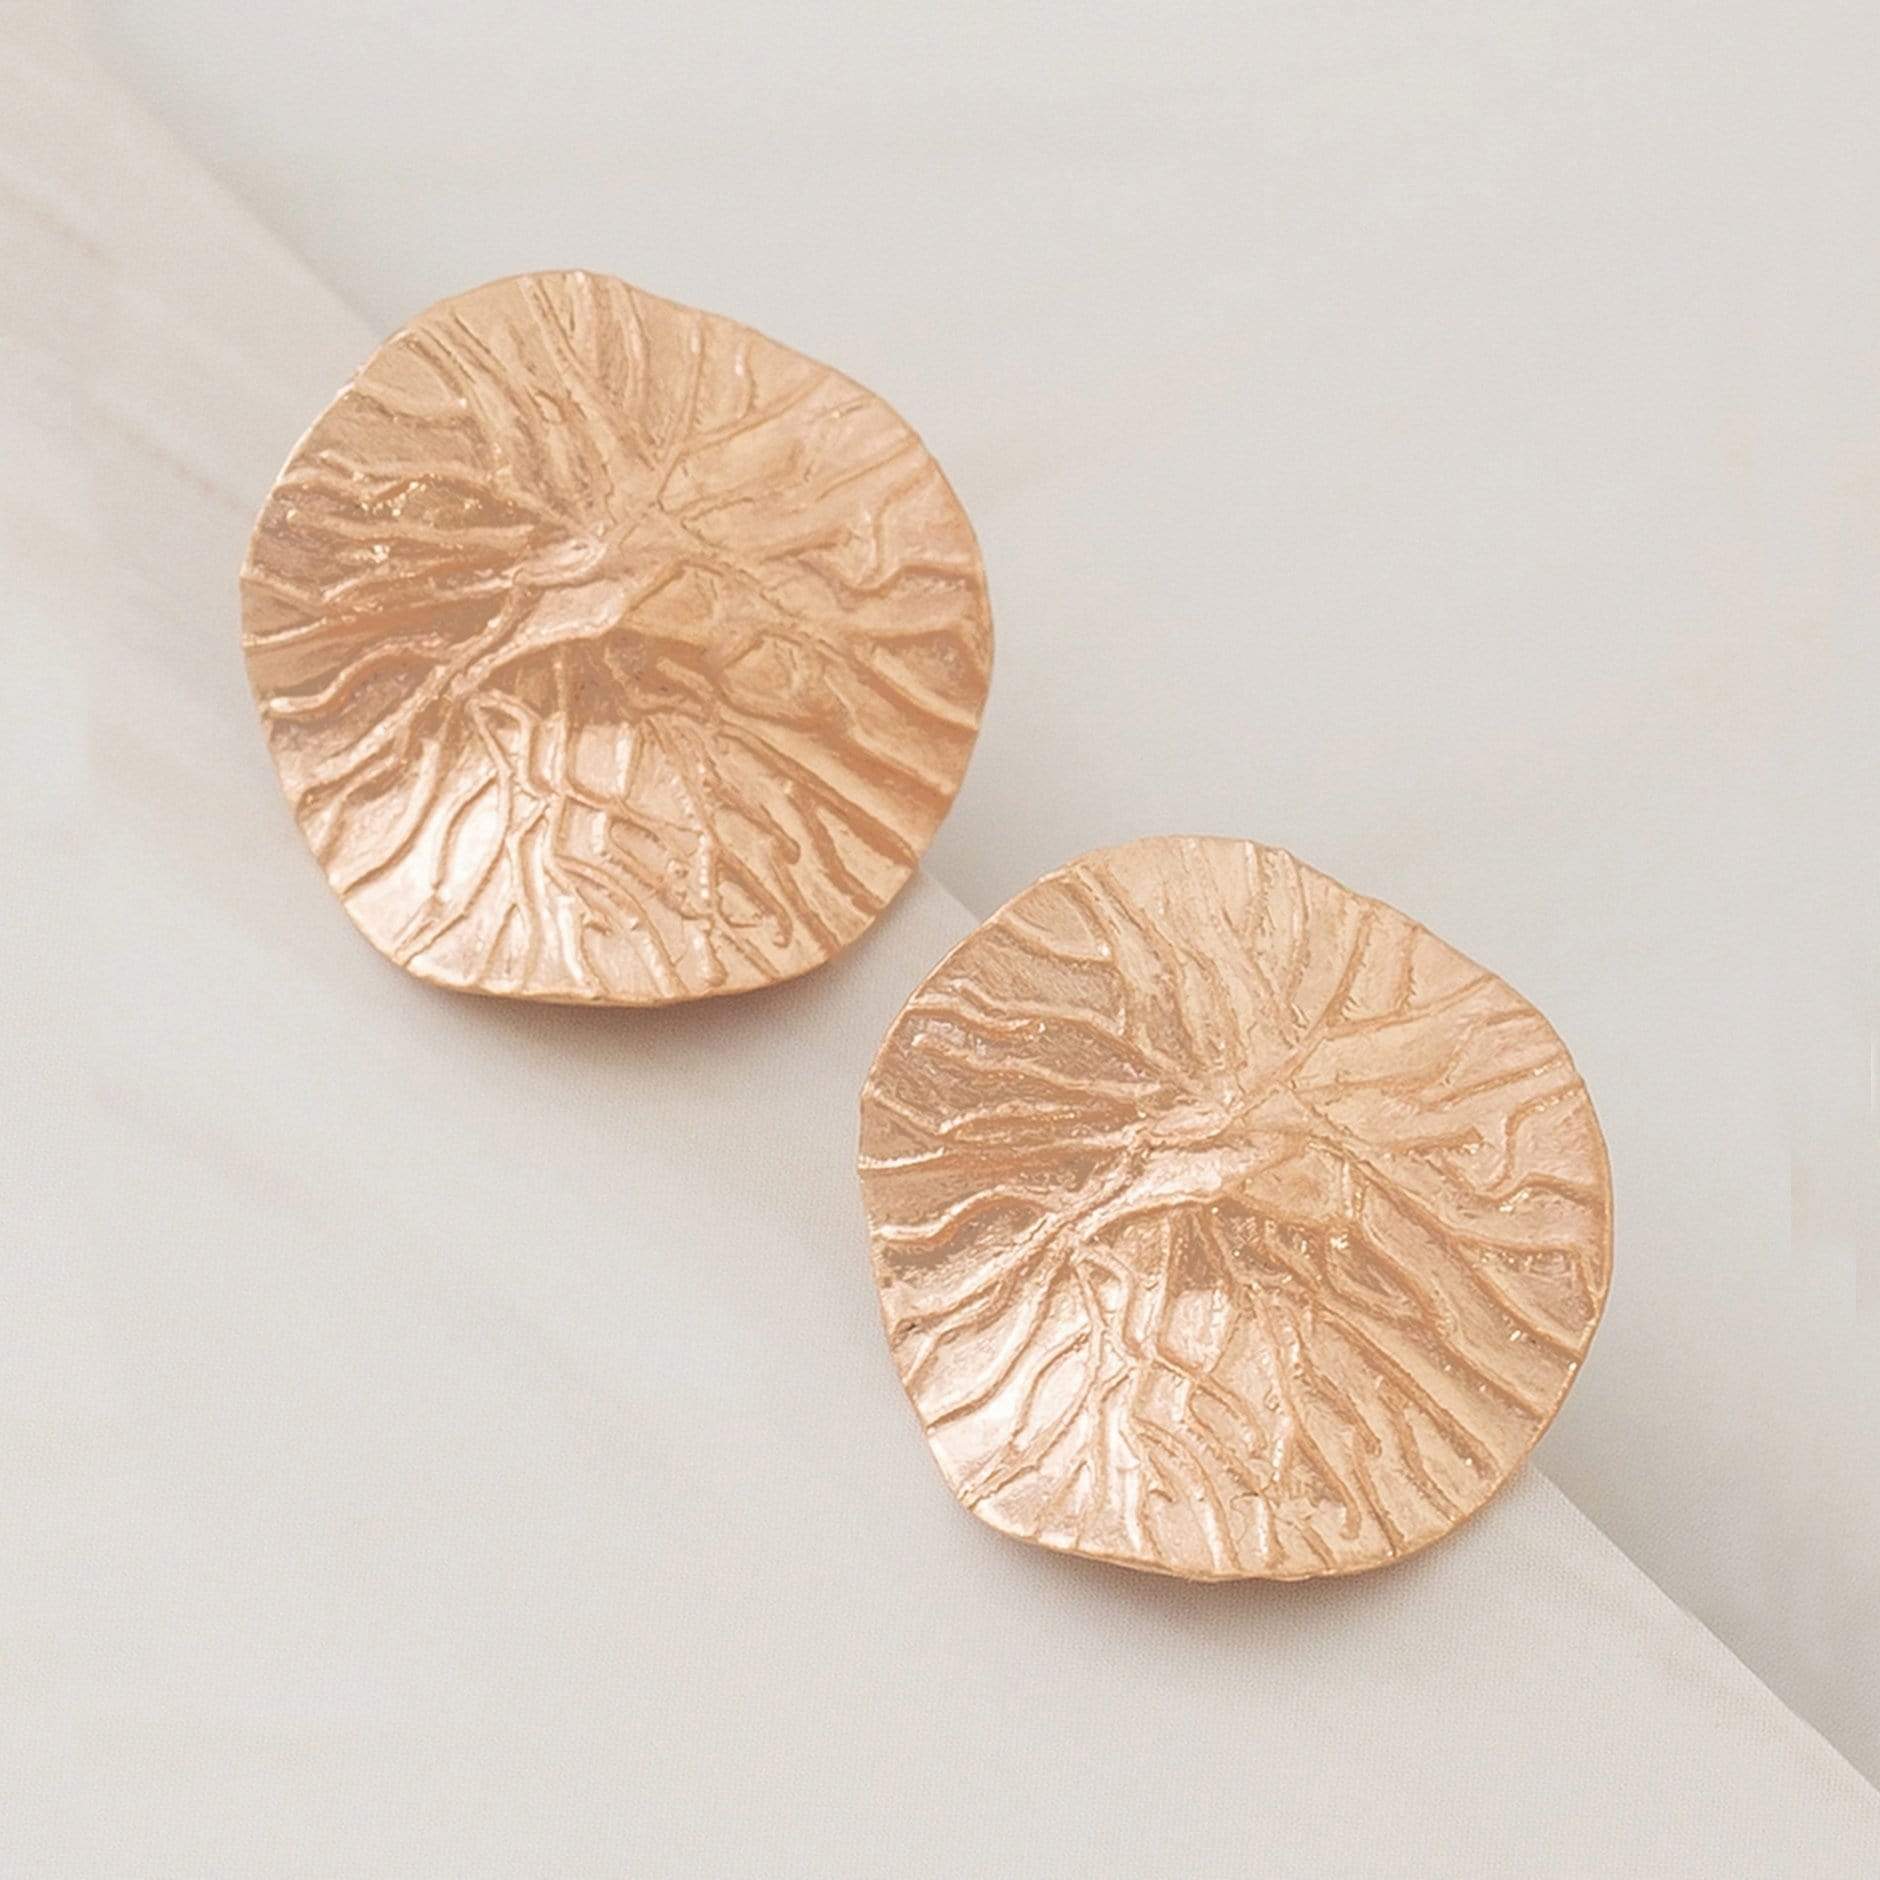 Emblem Jewelry Earrings Rose Gold Tone Petite Lily Pad Disc Statement Earrings